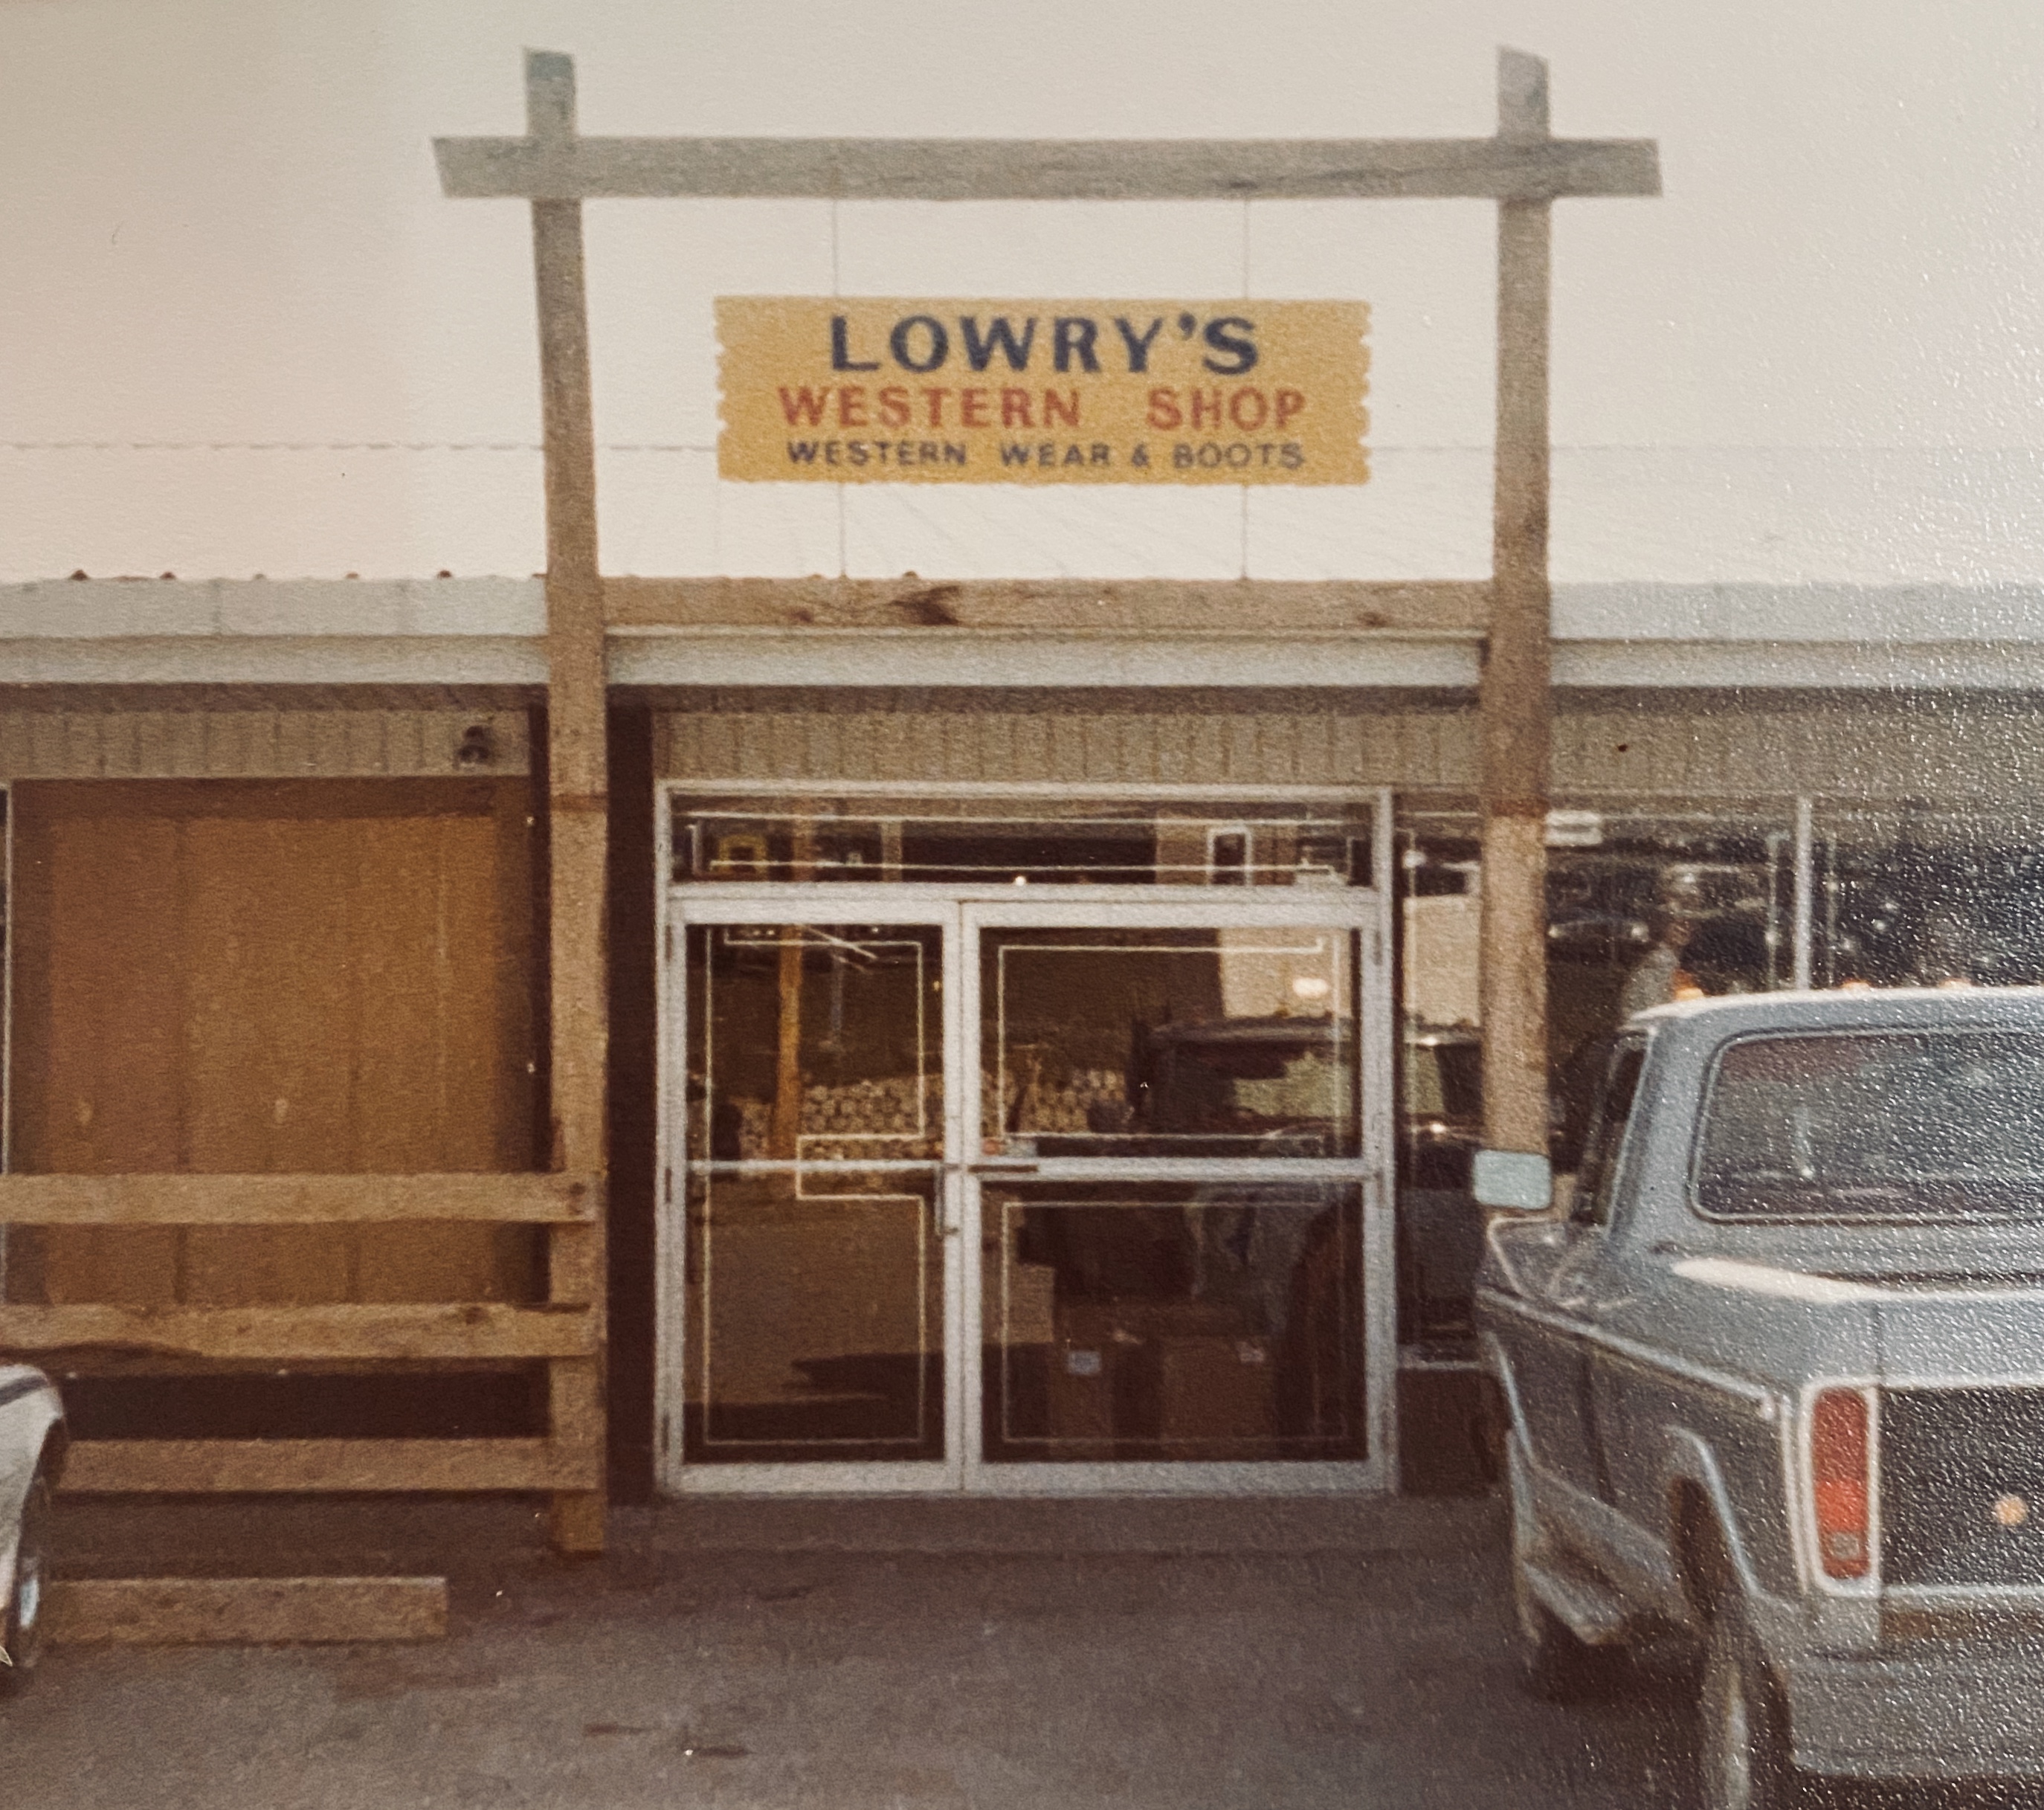 About – Lowry's Western Shop